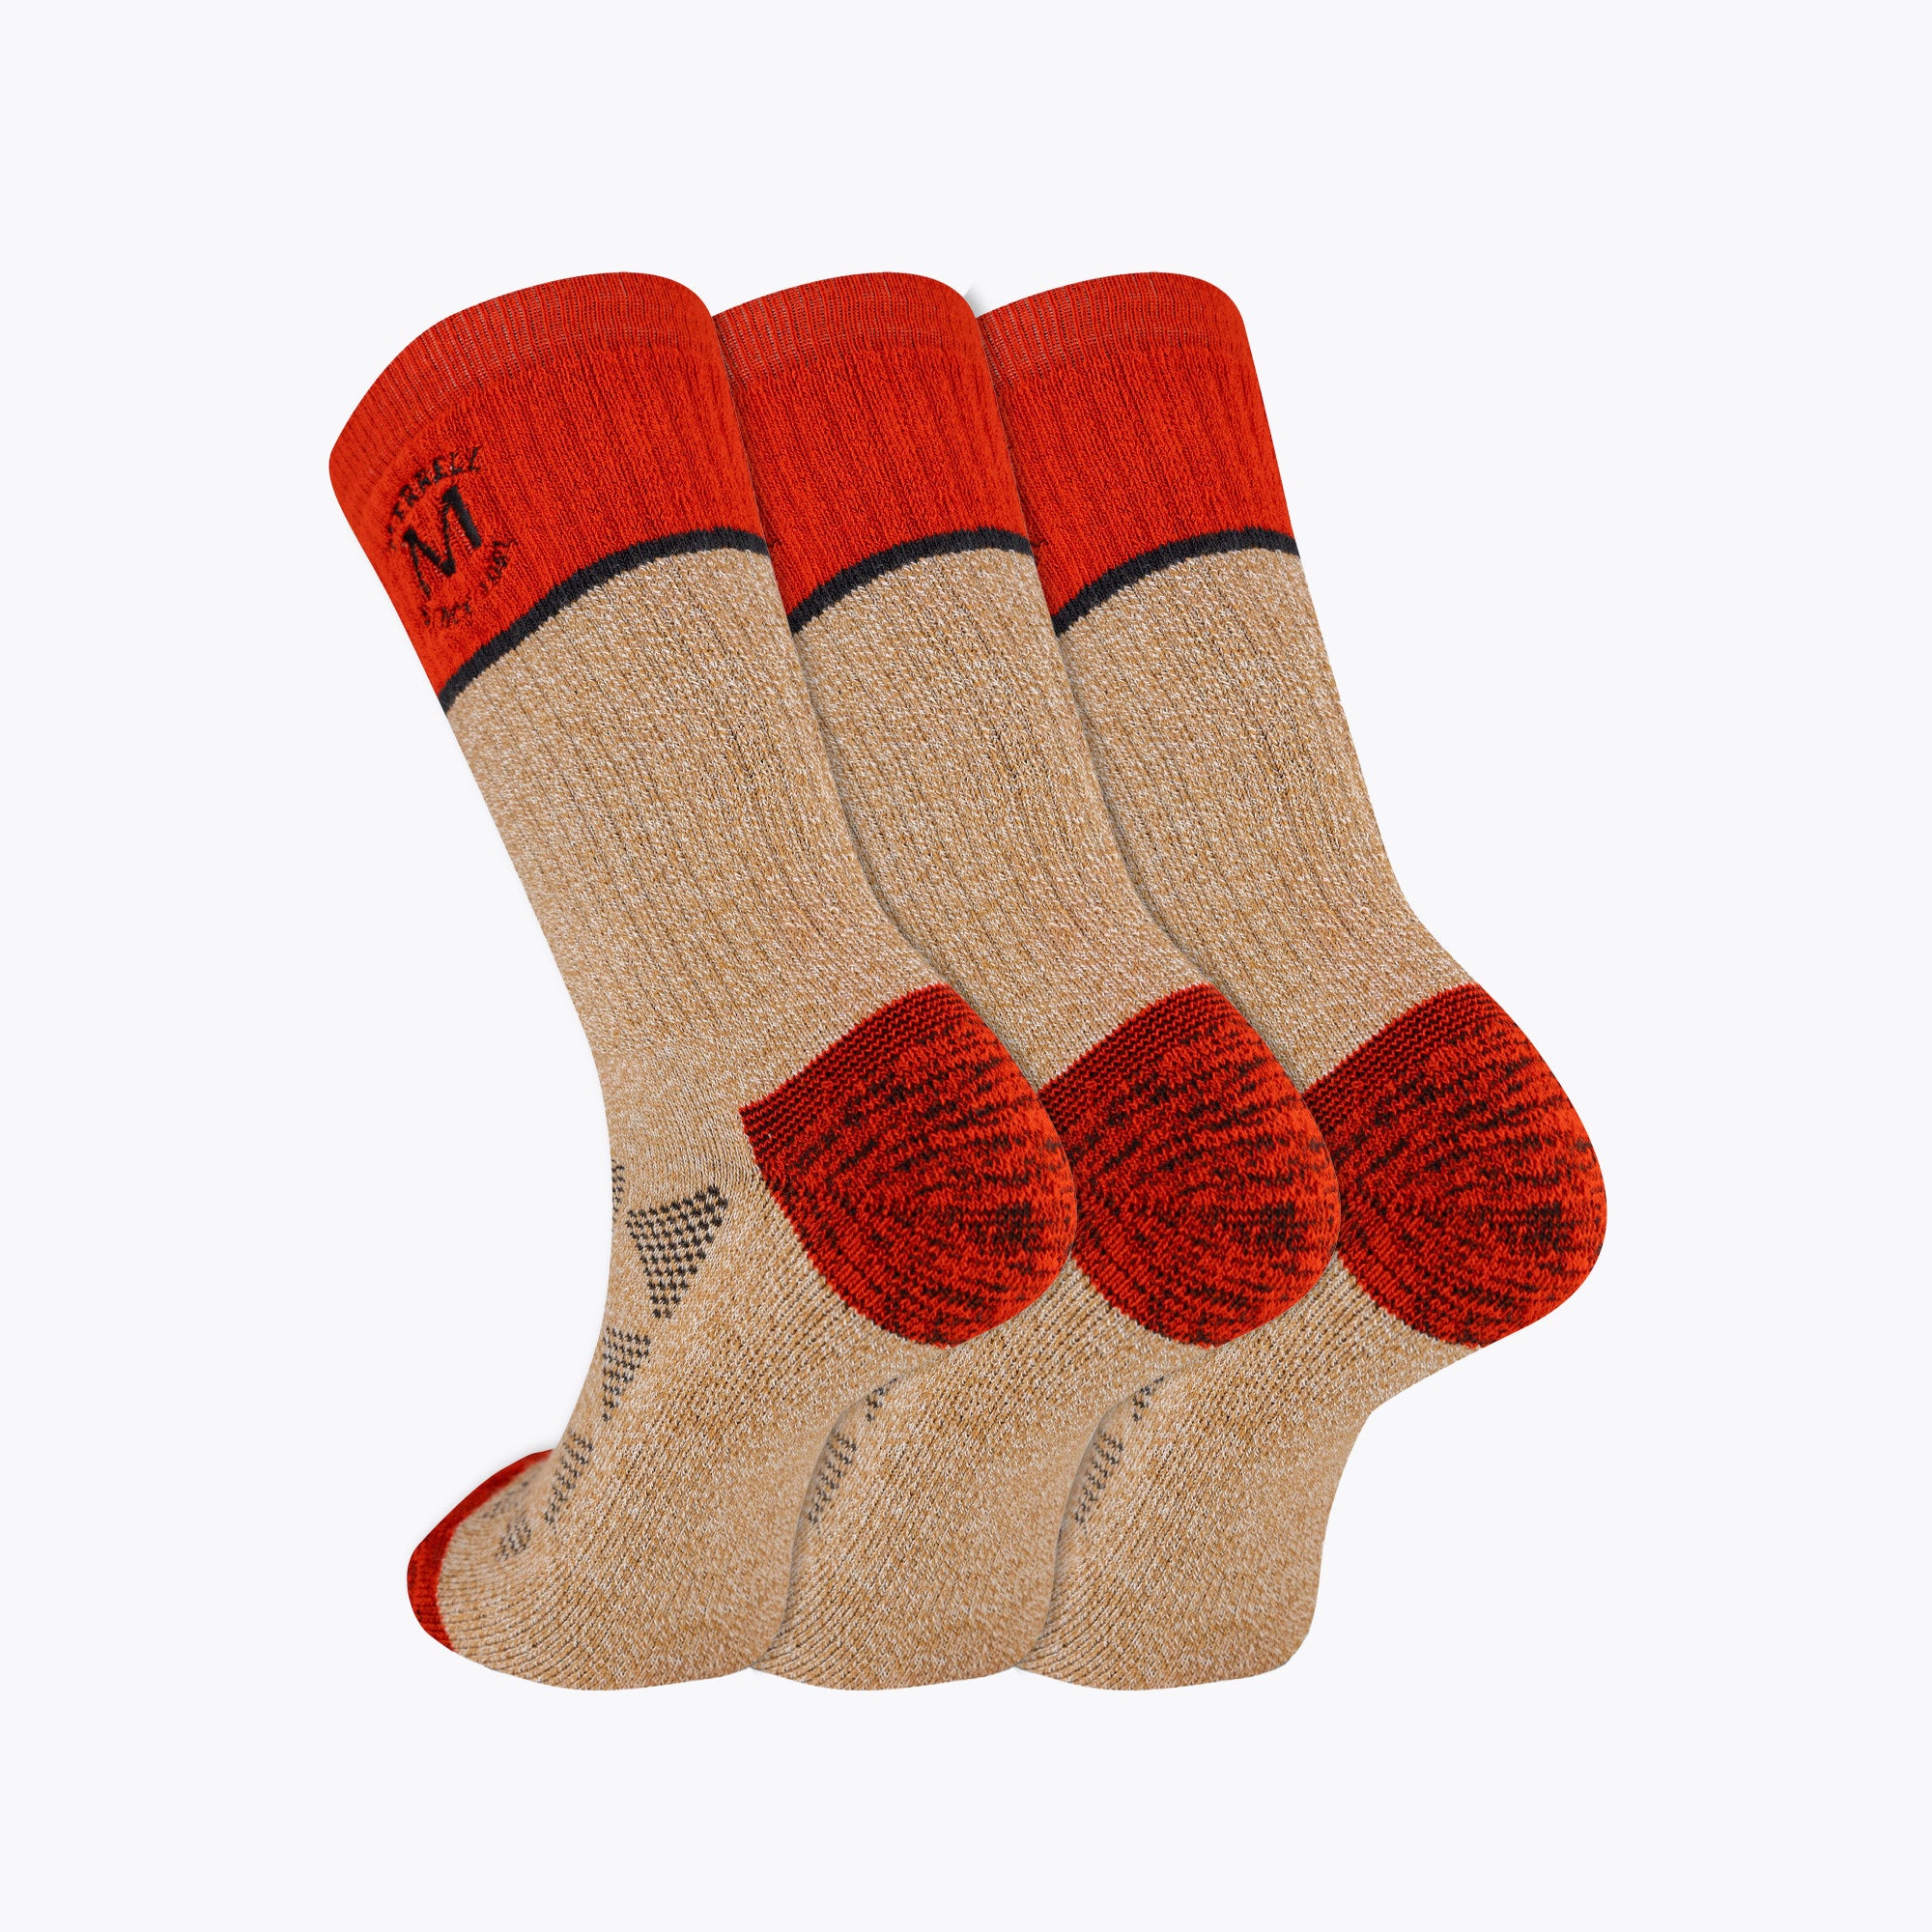 Crew MOAB Hiking Sock 3 Pack - Red